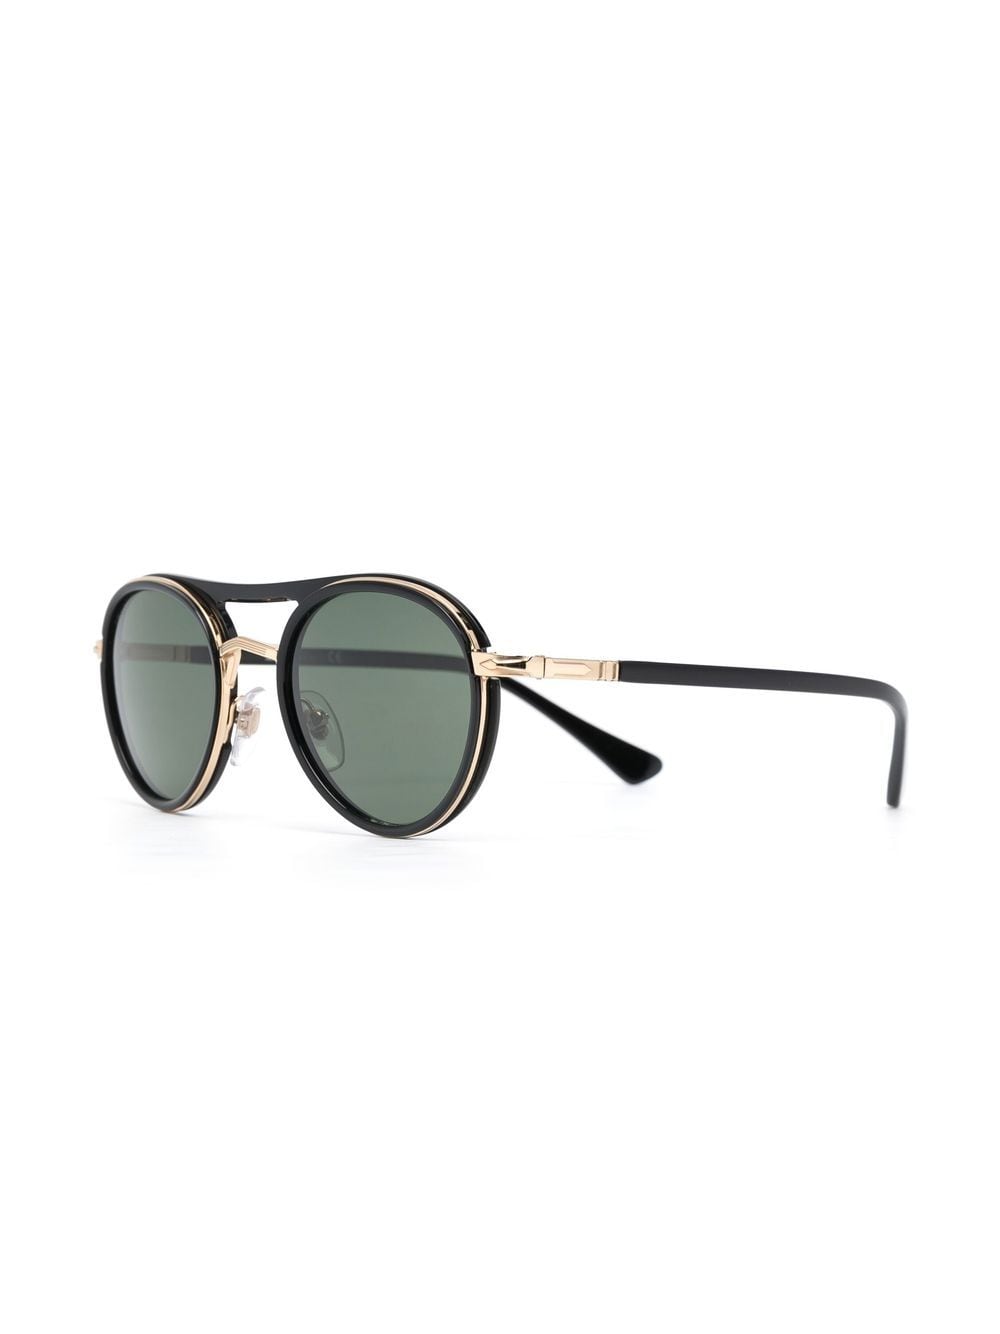 Image 2 of Persol round frame sunglasses